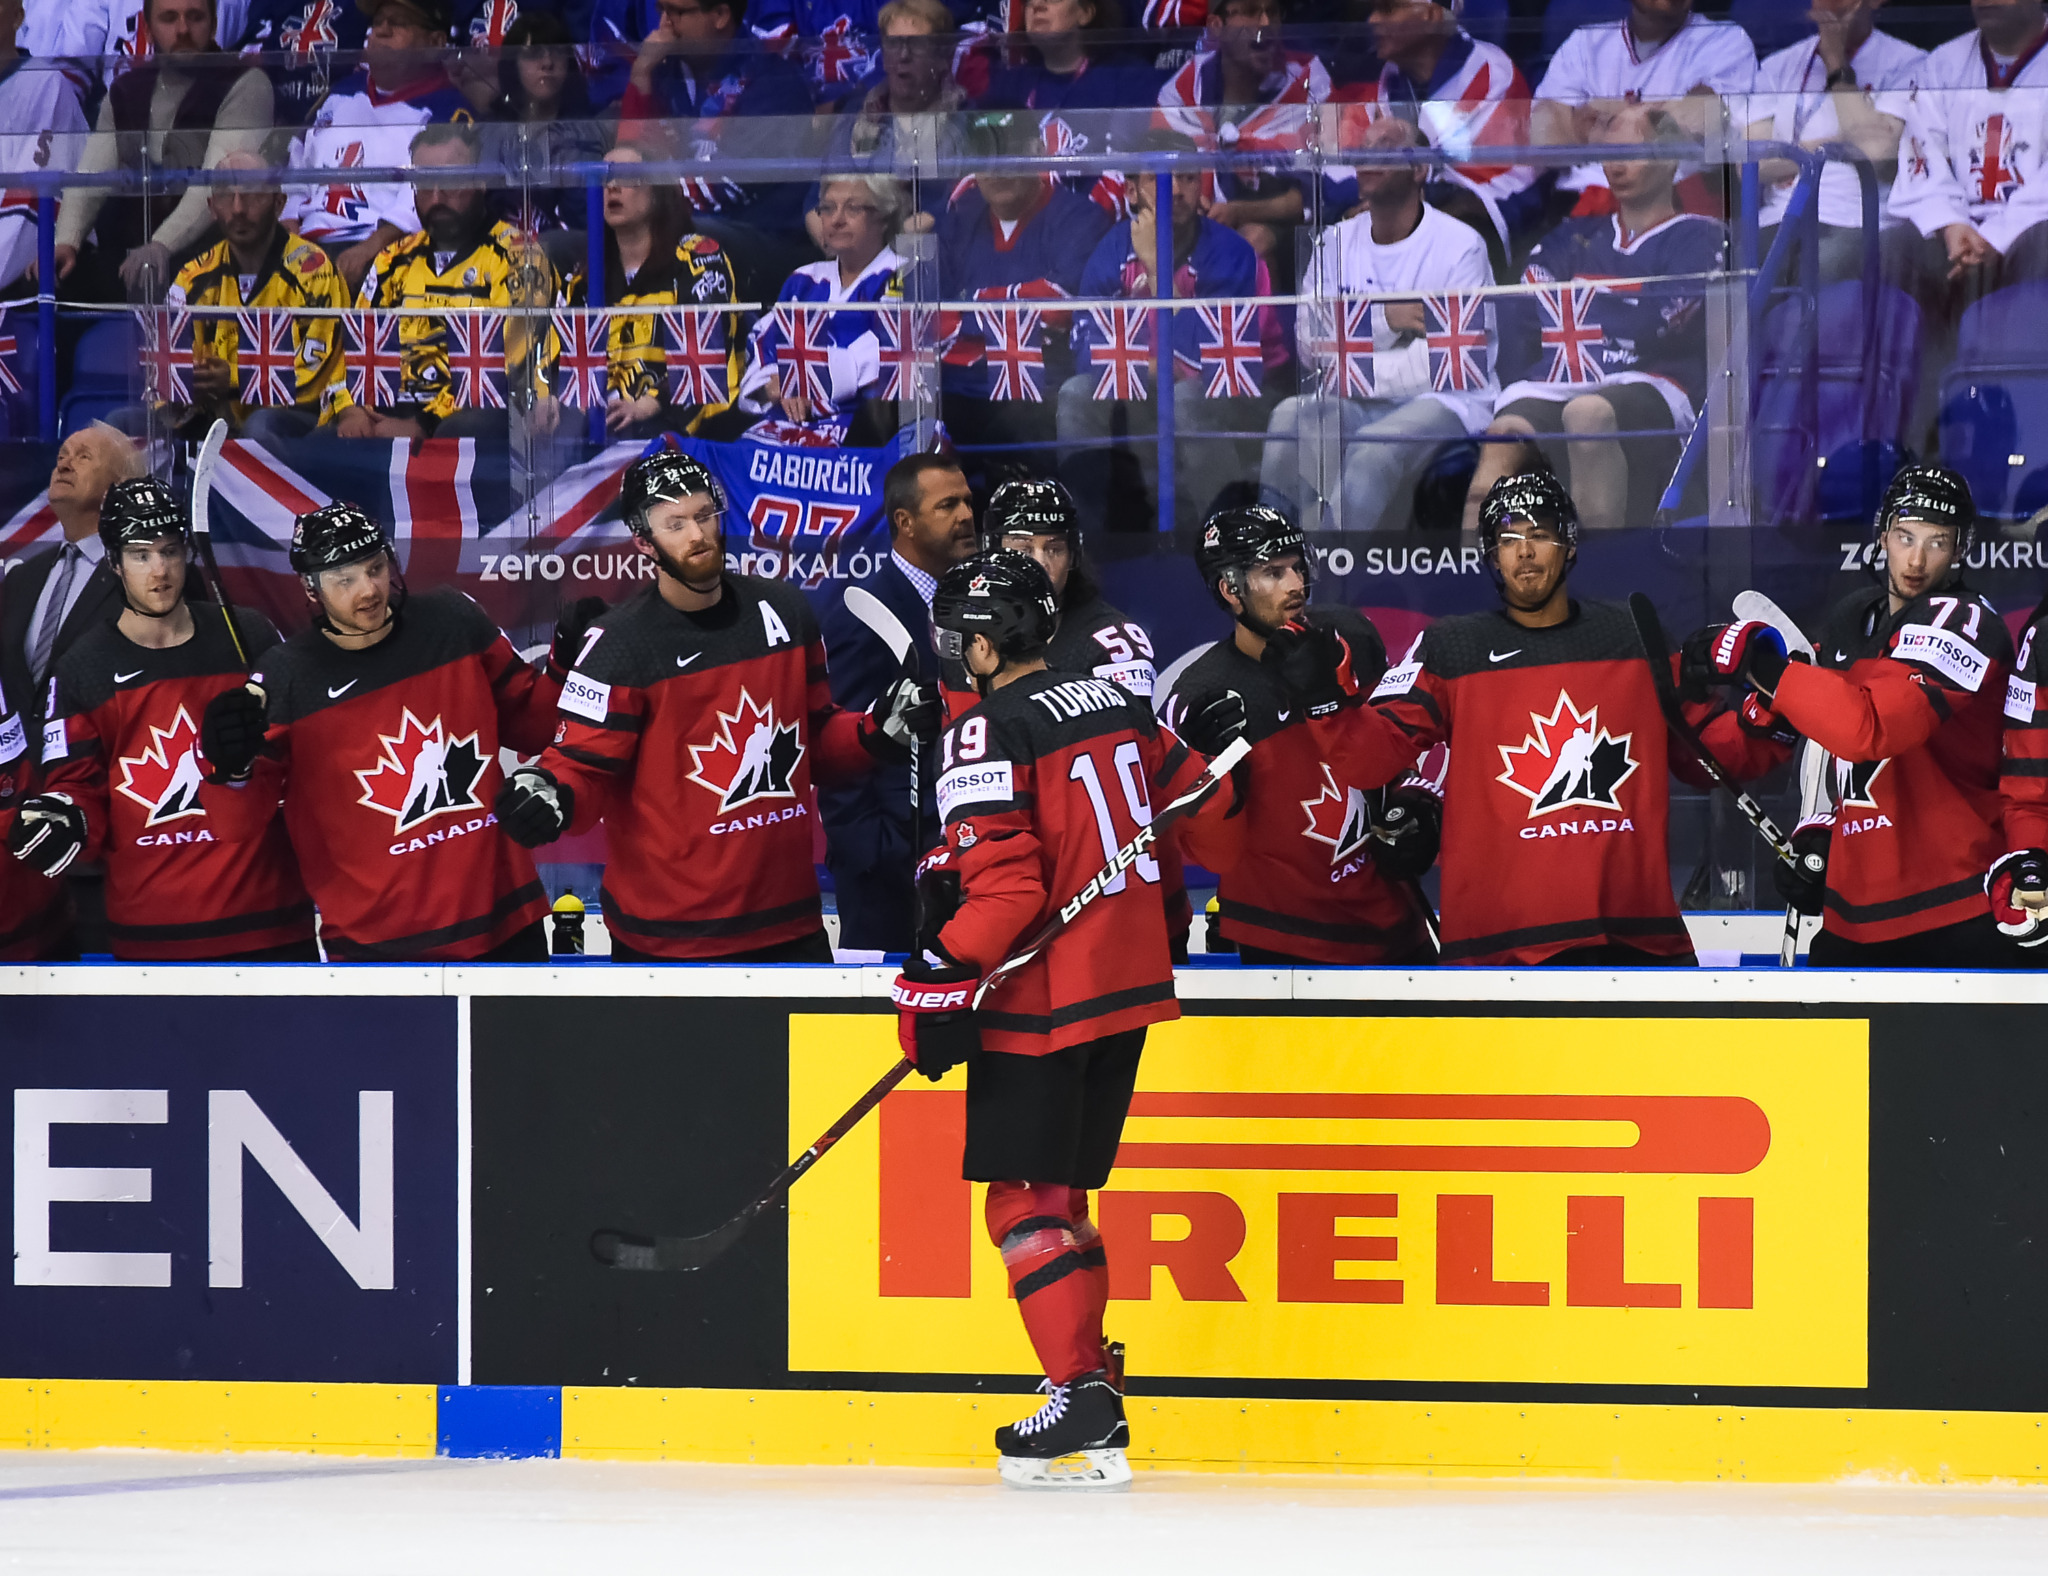 TSNs Exclusive Live Coverage of the 2021 IIHF WORLD CHAMPIONSHIP Begins May 21